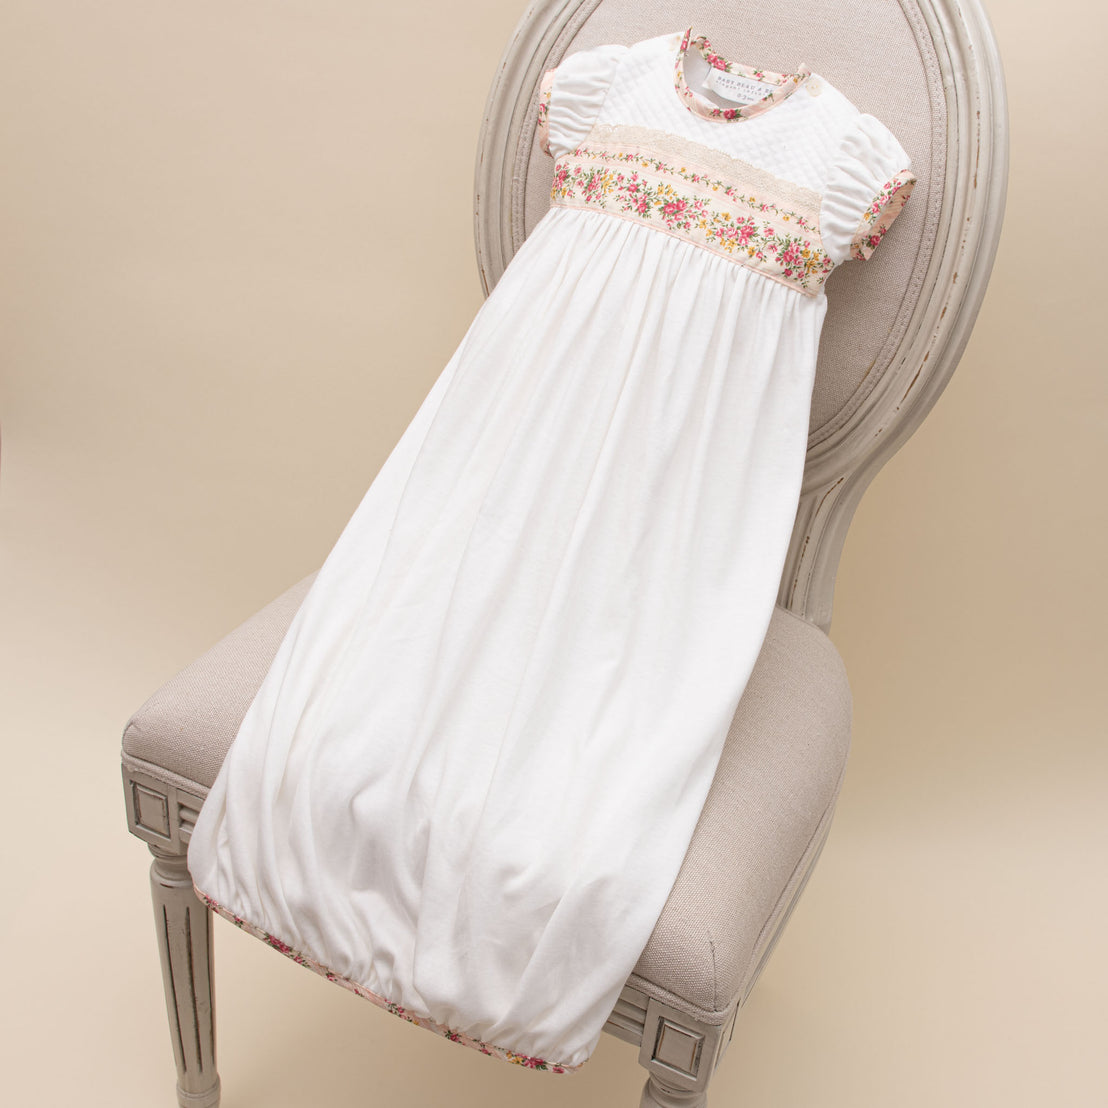 Flat lay of the Eloise Layette Gown in "Blush". Details show the white pima cotton sleeves with white quilted textured cotton bodice. The gown features cotton lace, as well as, floral and striped cotton bodice details. Button closures are on both shoulders.